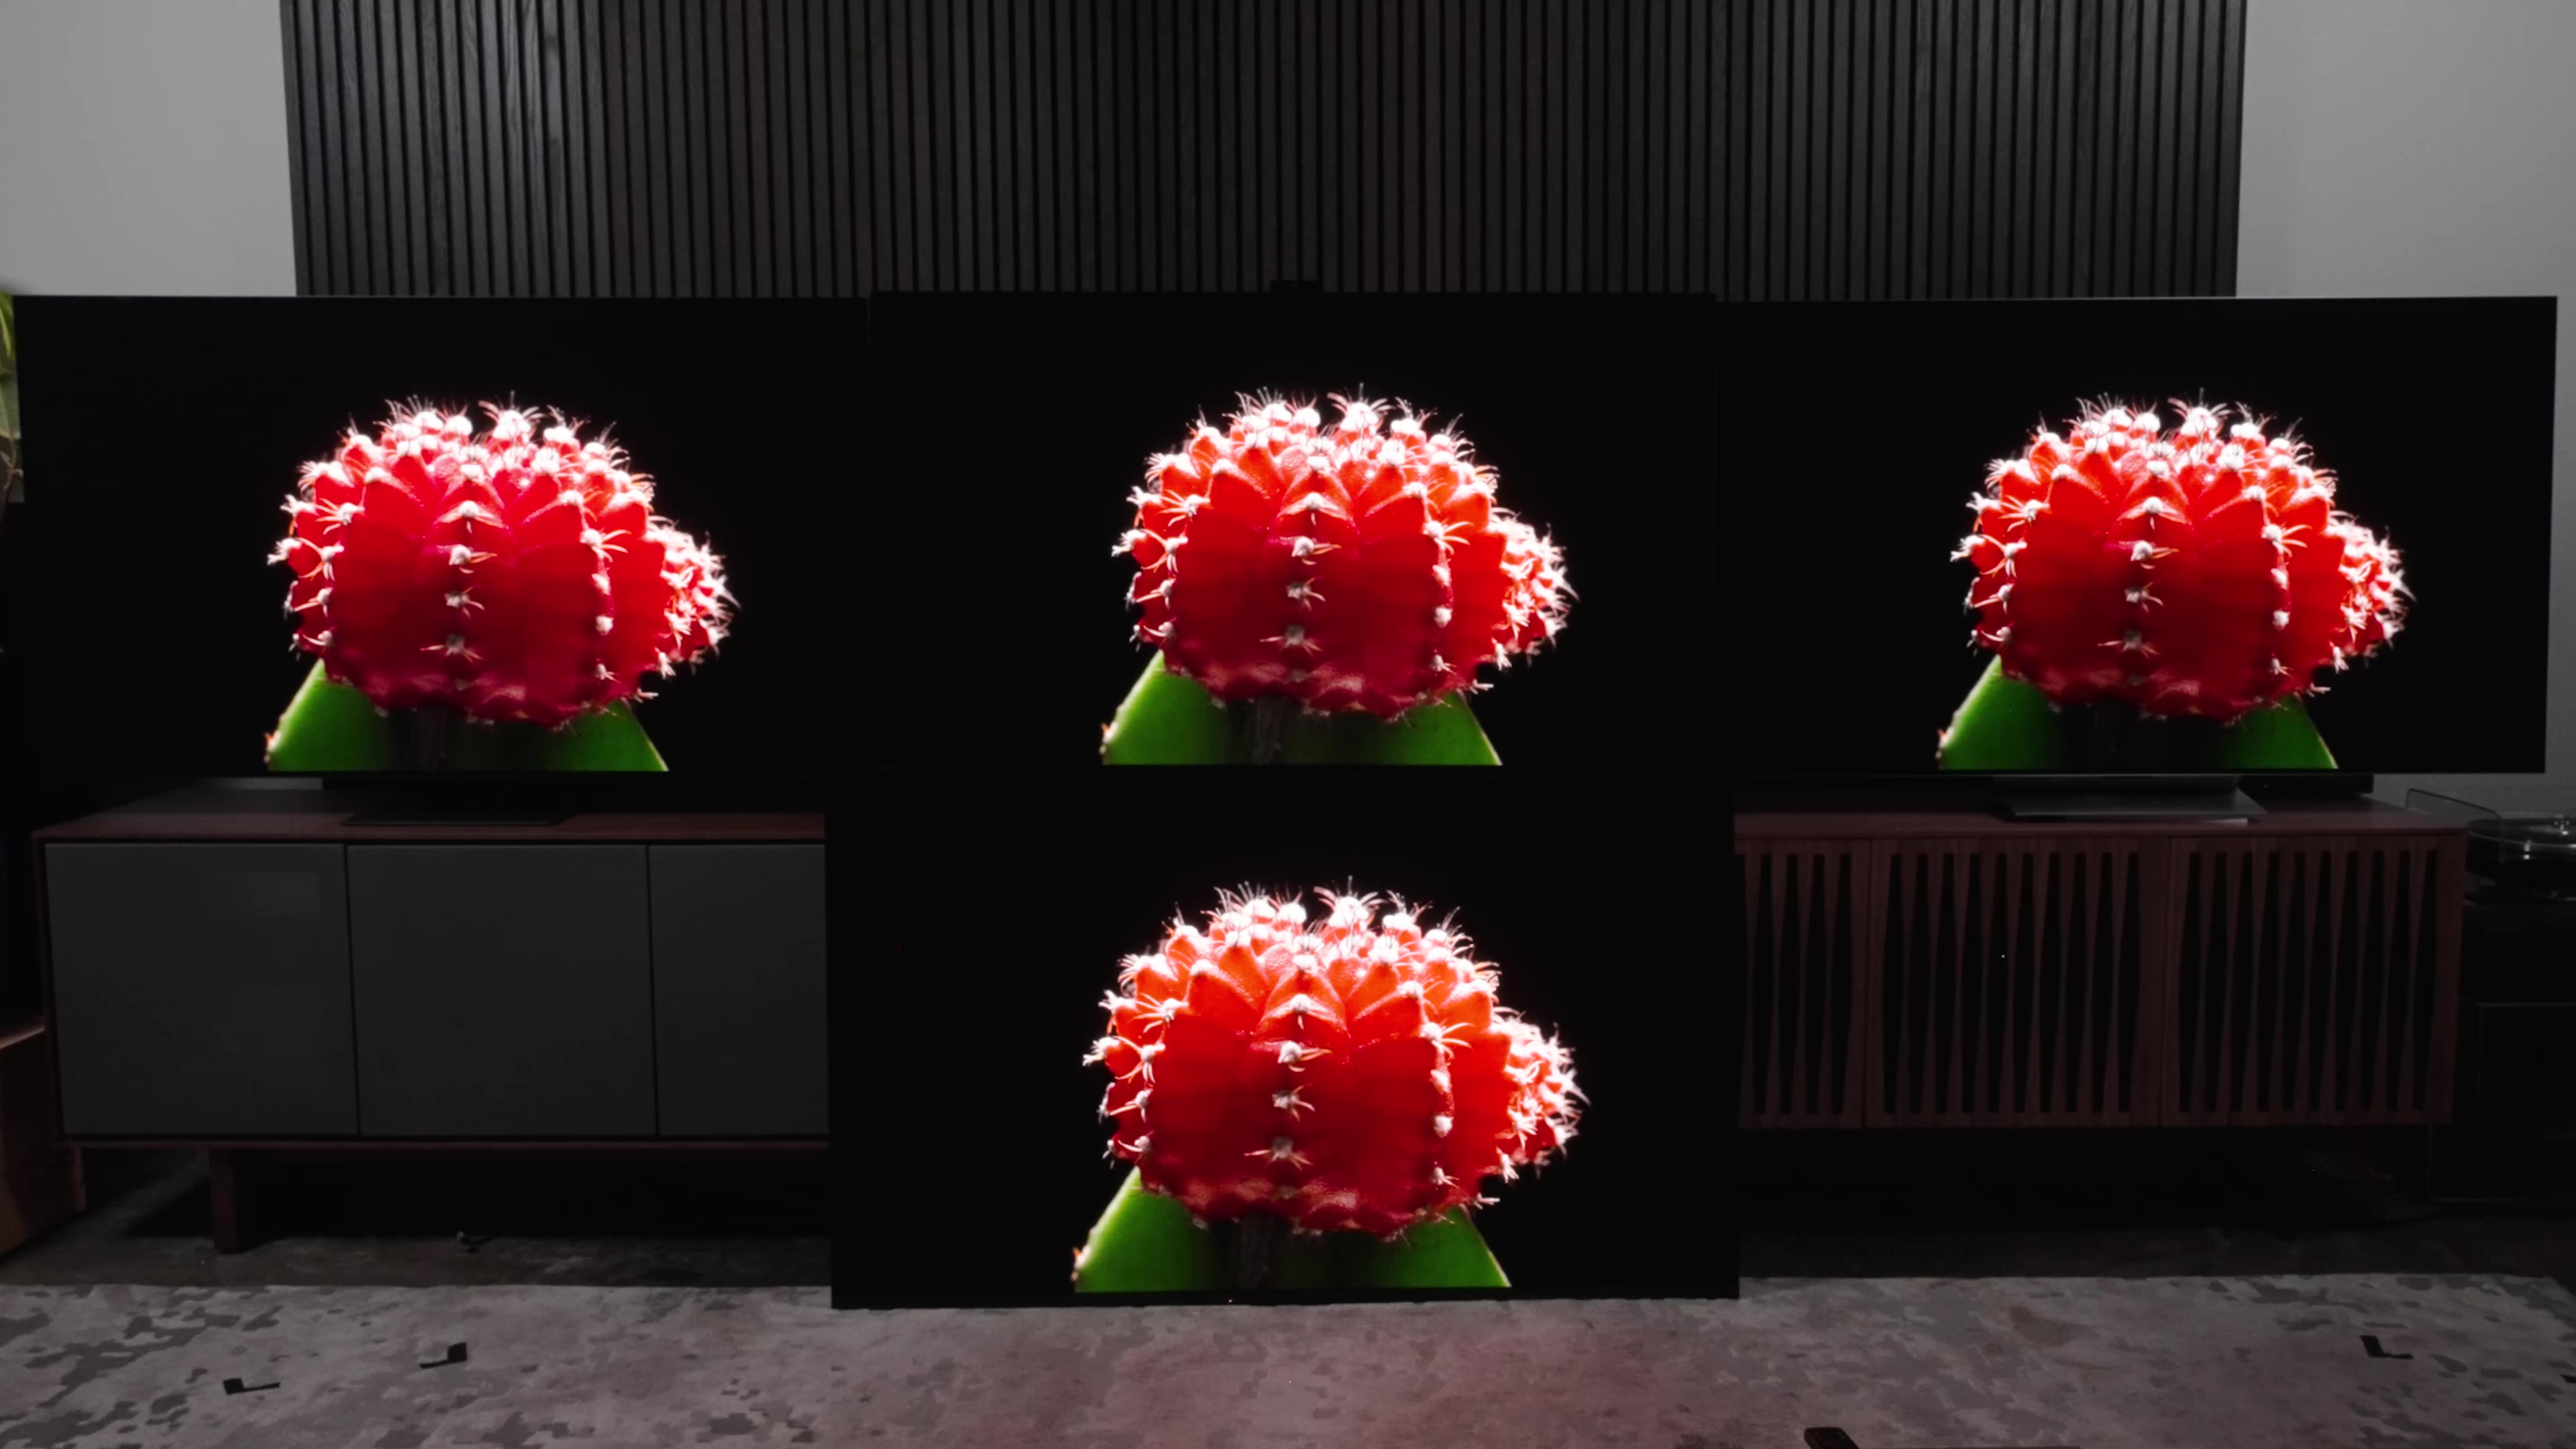 A red cactus flower against a black background shown on four TVs. 